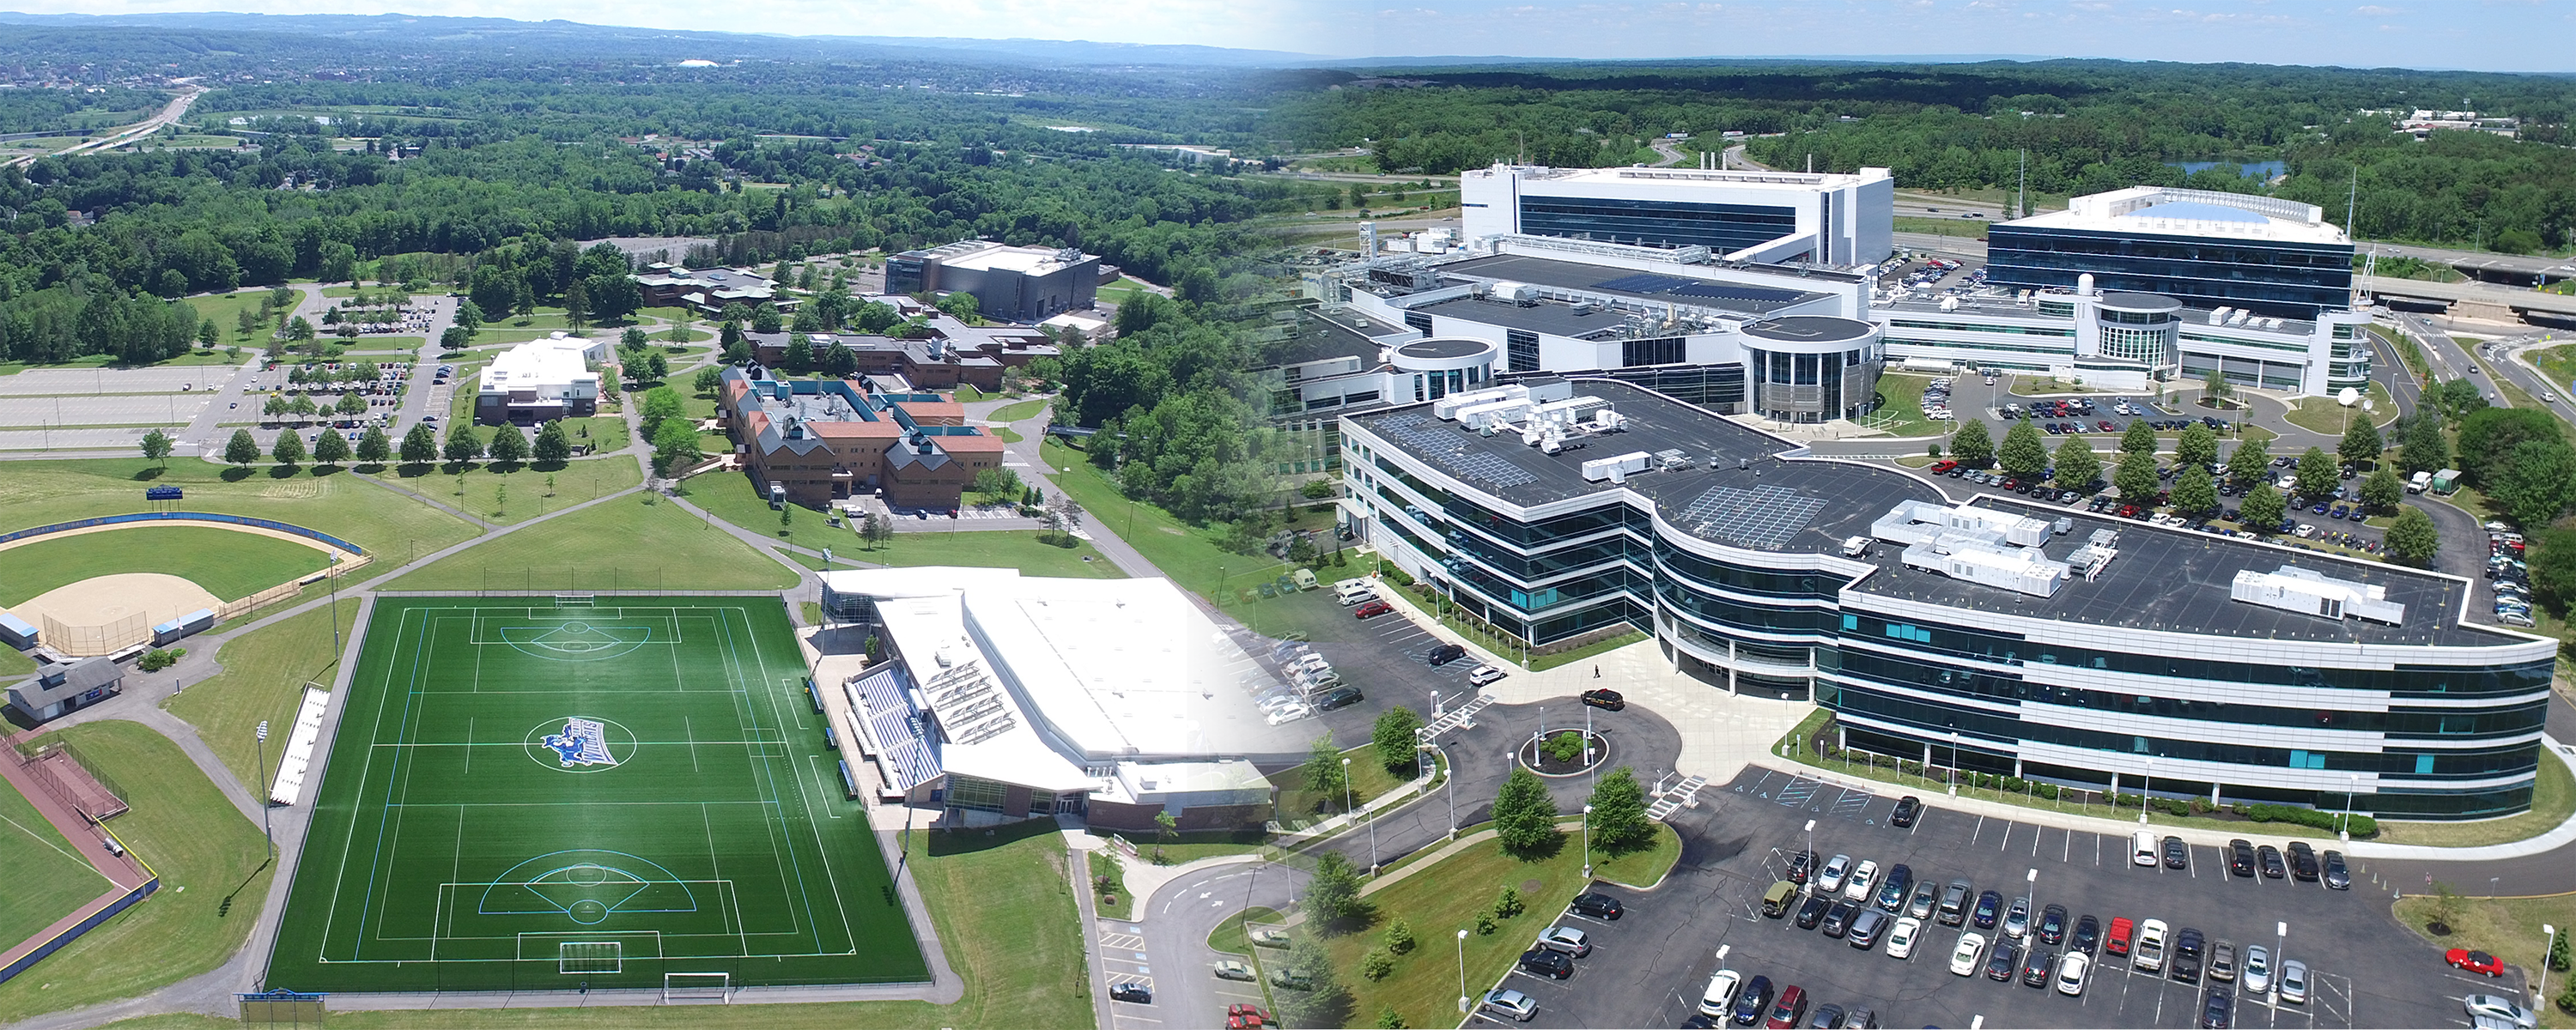 Photos of SUNY Poly's Utica campus and Albany campus merged